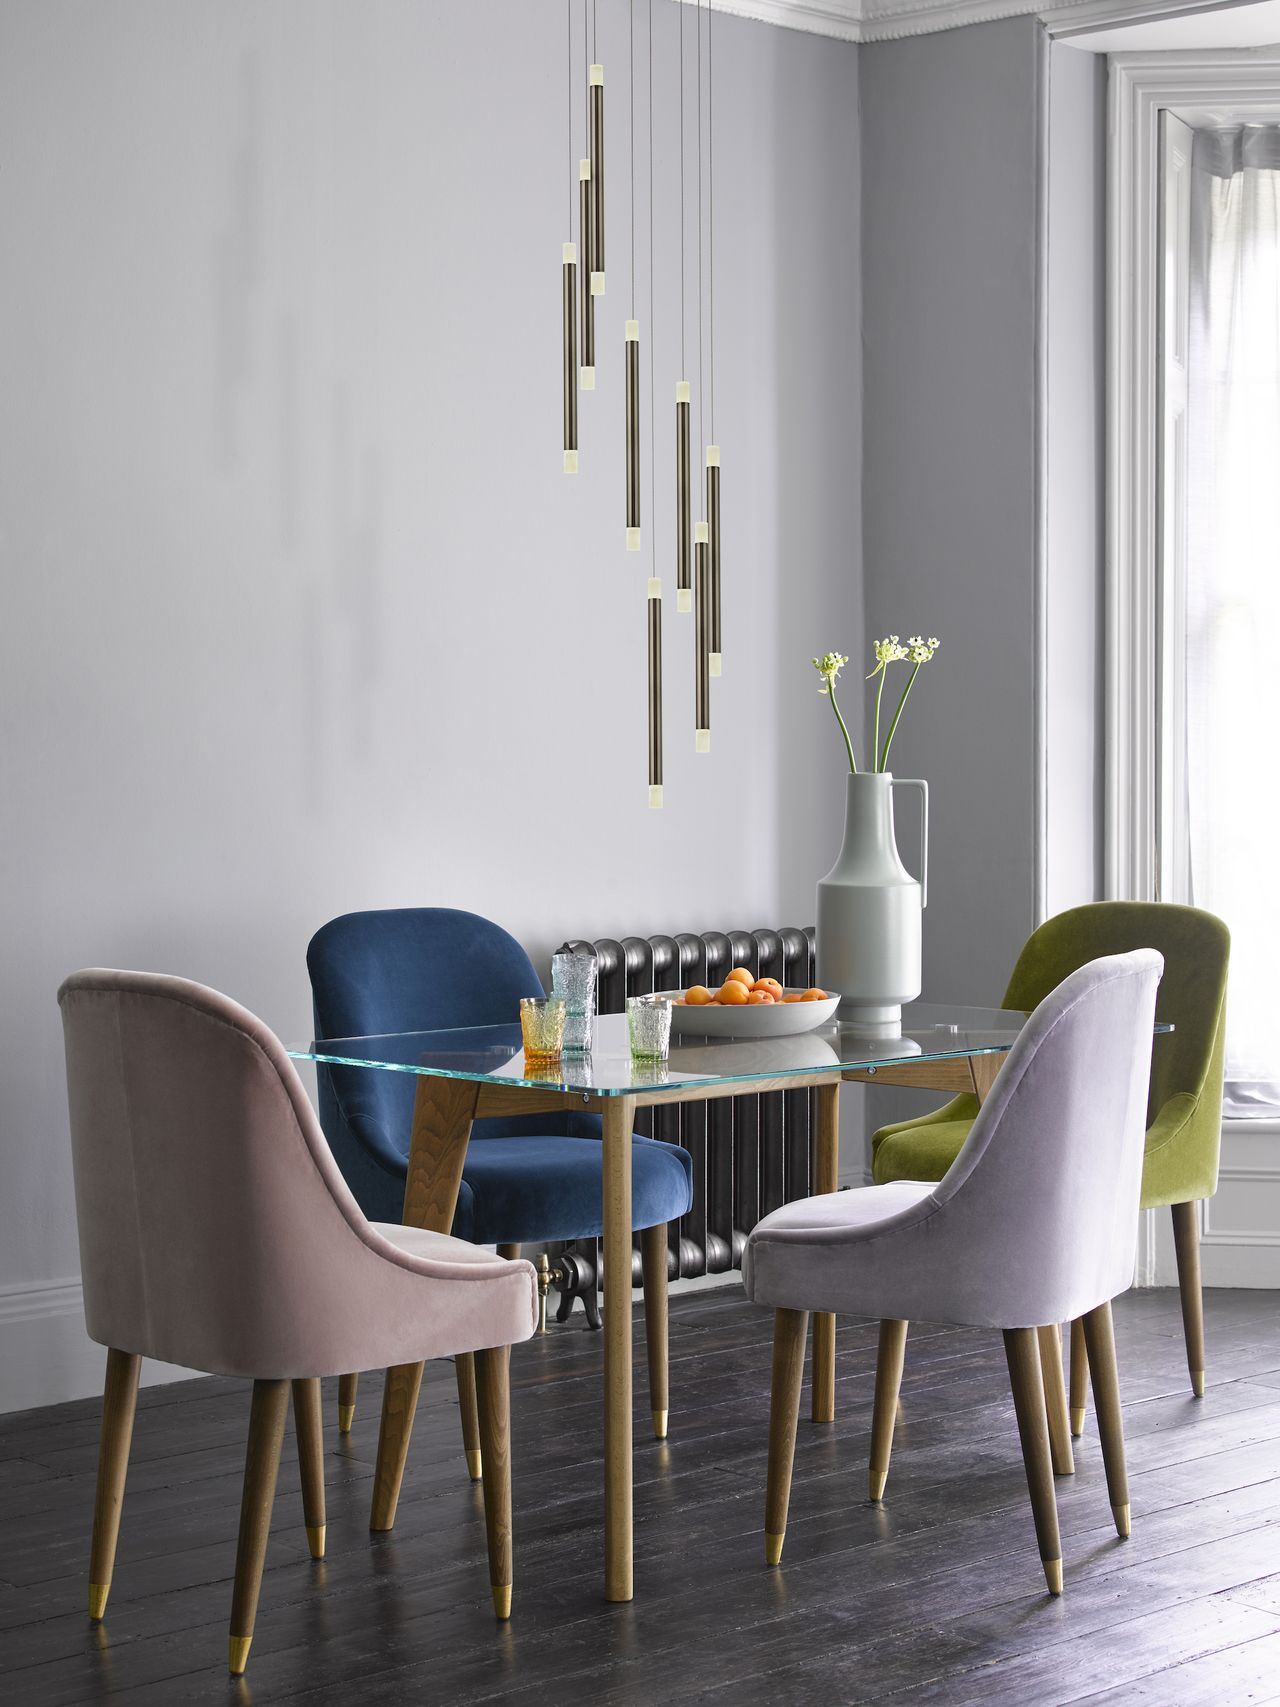 Modern dining room ideas: 16 looks to inspire no matter what size your